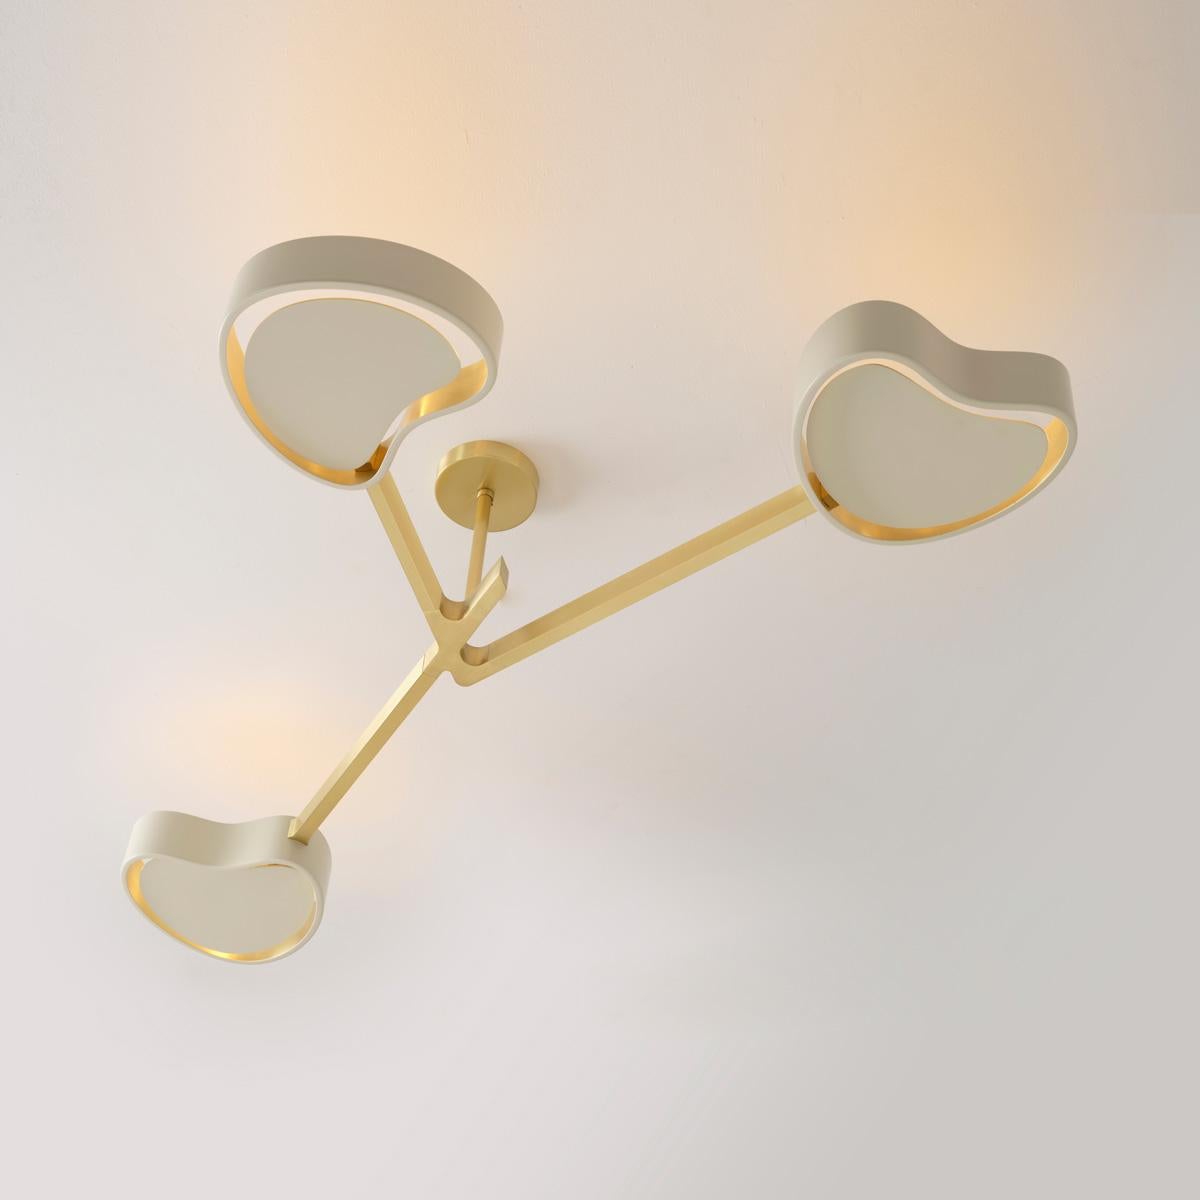 Cuore N.3 Ceiling Light by Gaspare Asaro. Satin Brass and Sand White In New Condition For Sale In New York, NY